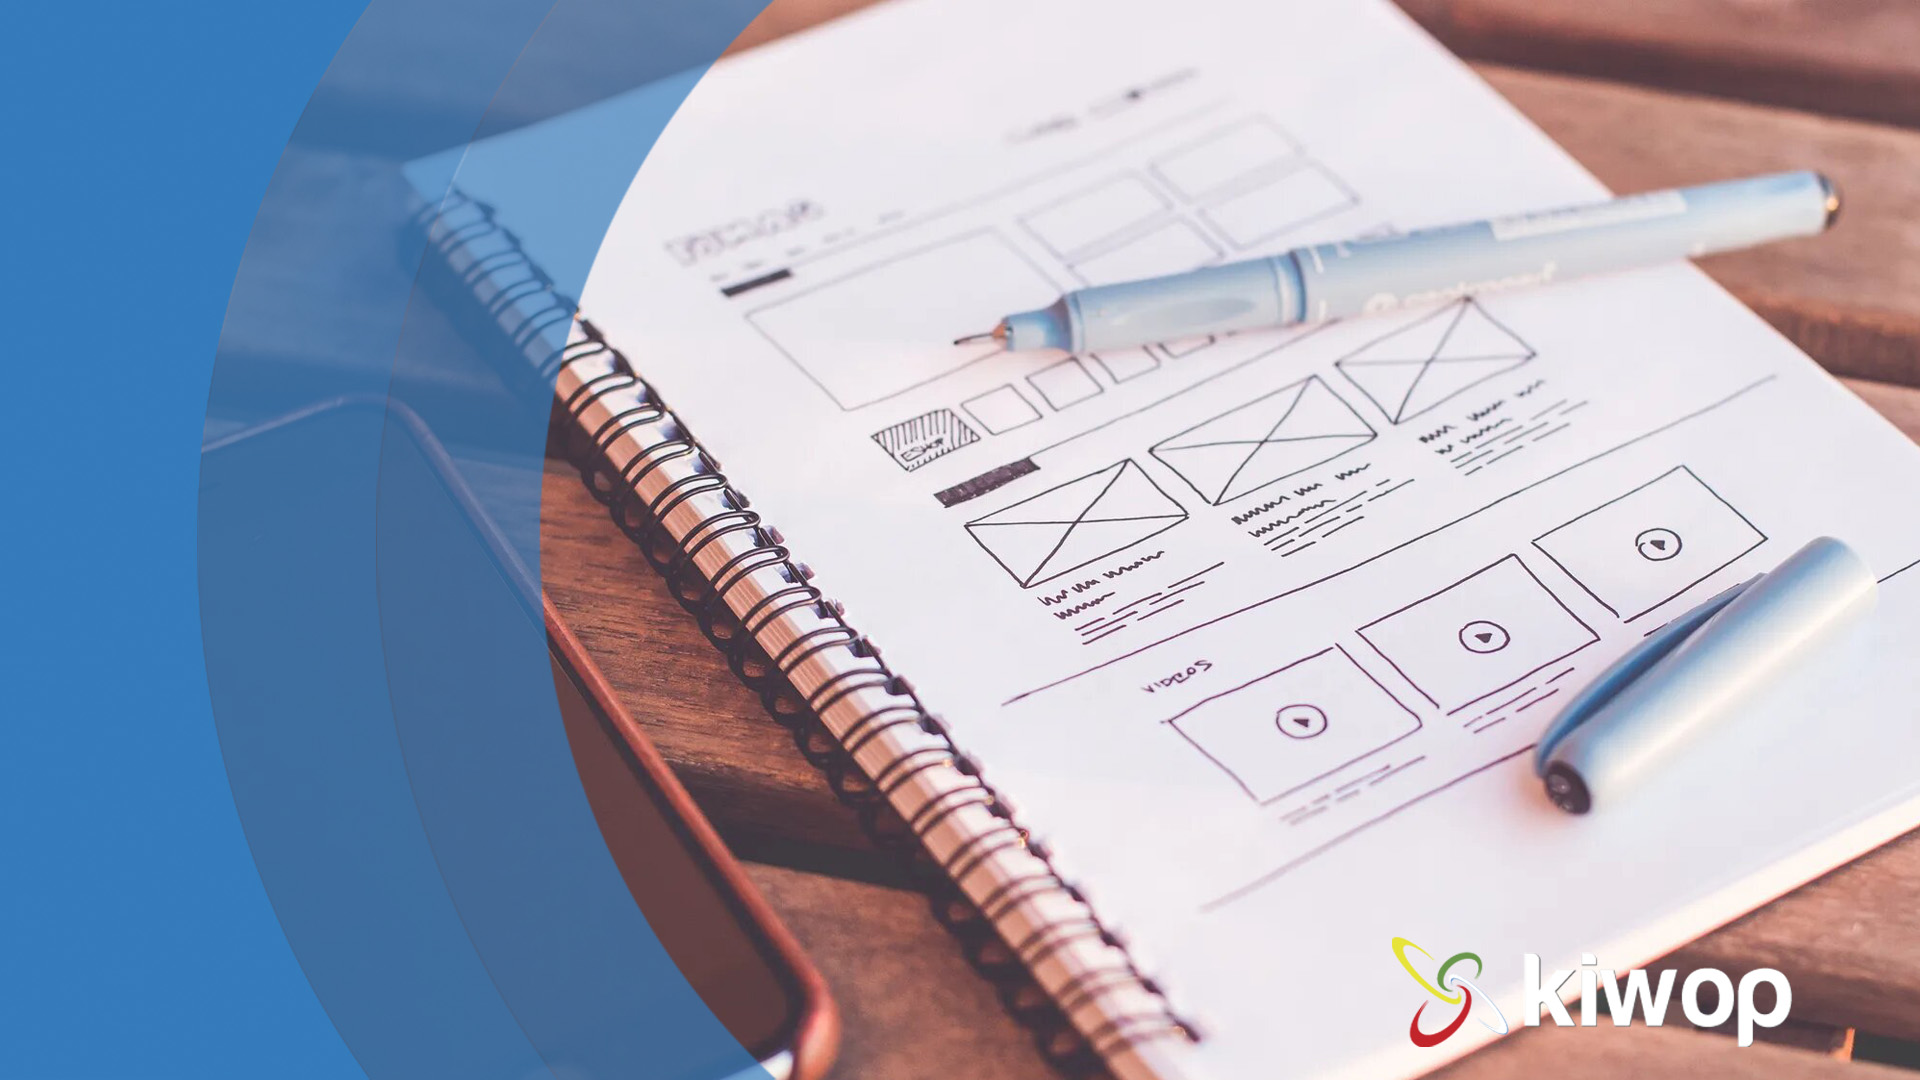 Wireframes in web design: must design from scratch